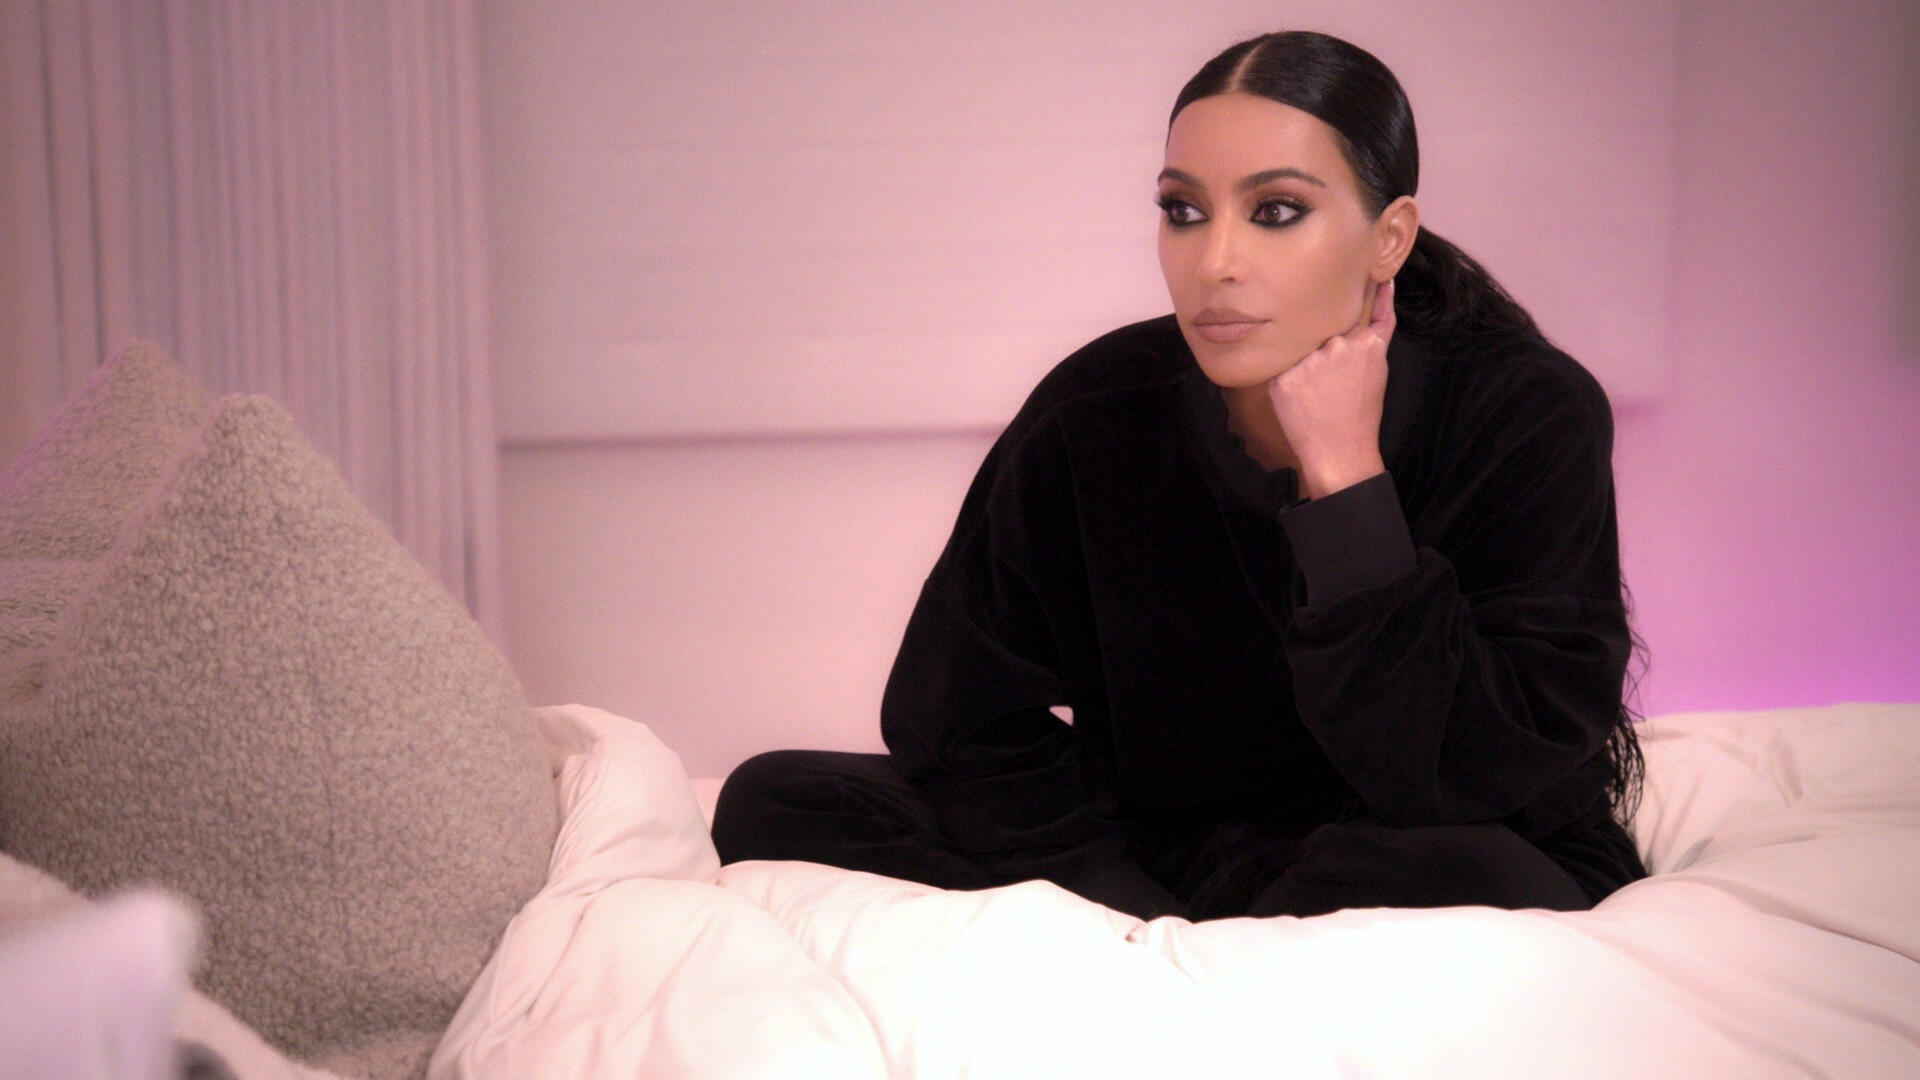 Kim Kardashian Hints Her Marriage to Kanye West Was Crumbling Much Earlier Than People Realize: ‘If They Only Knew’